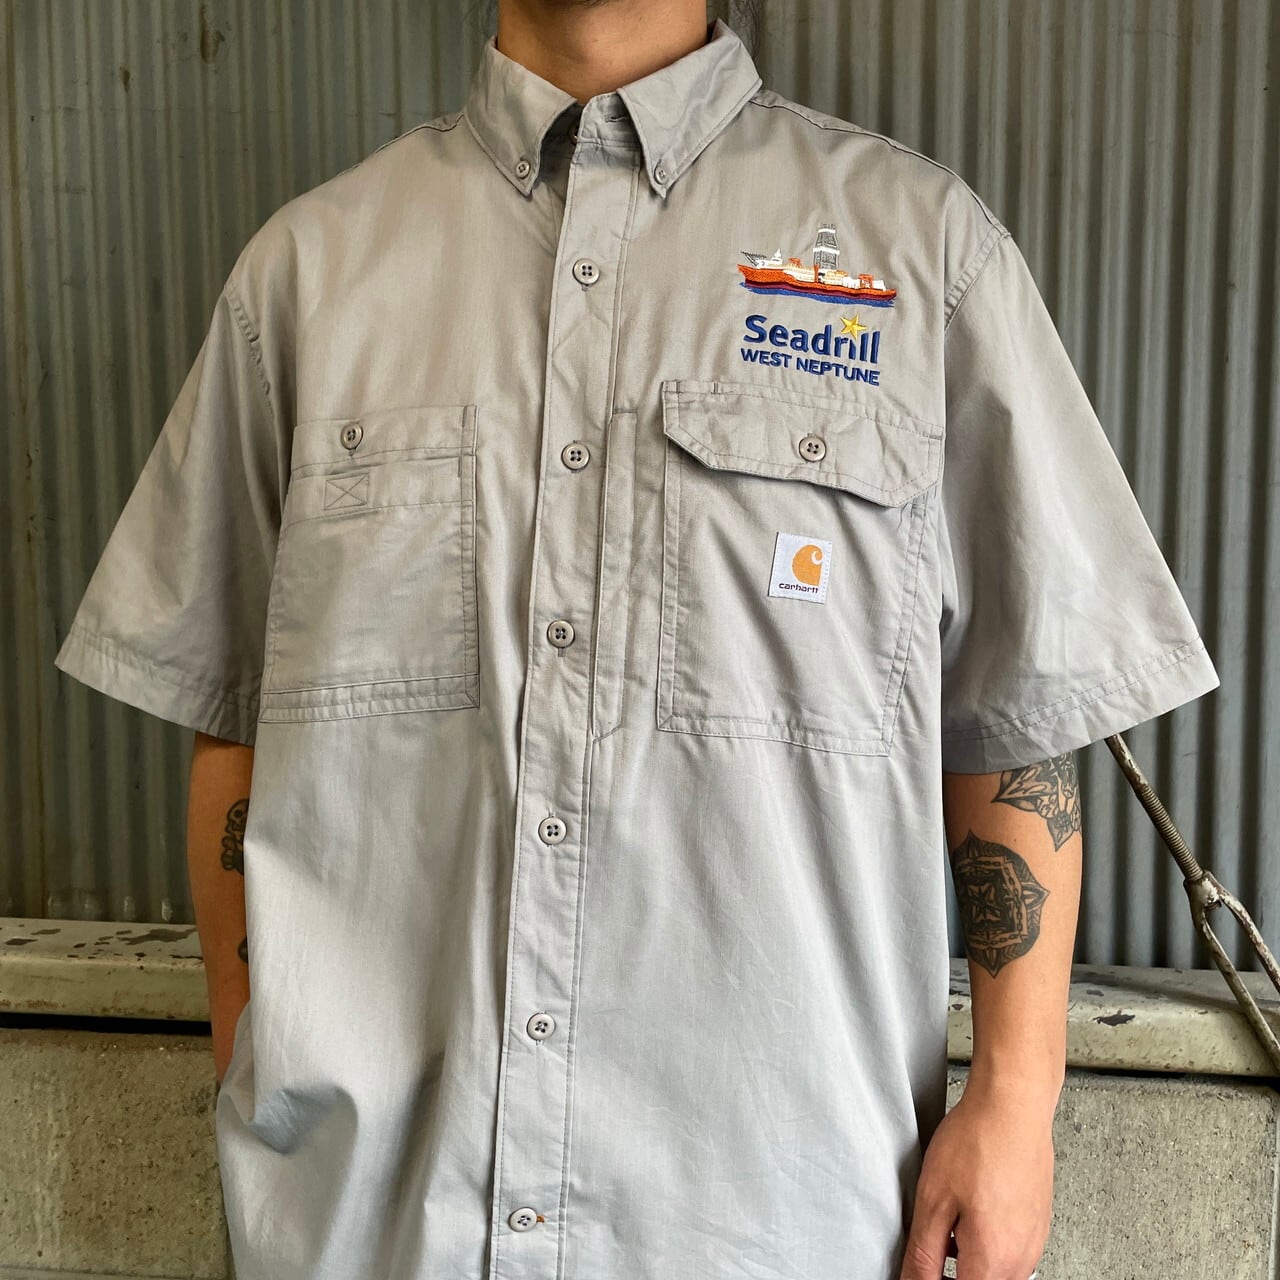 Carhartt カーハート 企業ロゴ刺繍 半袖ワークシャツ メンズL 古着 グレー 灰色 RELAXED FIT【半袖シャツ】【PS0707】 |  cave 古着屋【公式】古着通販サイト